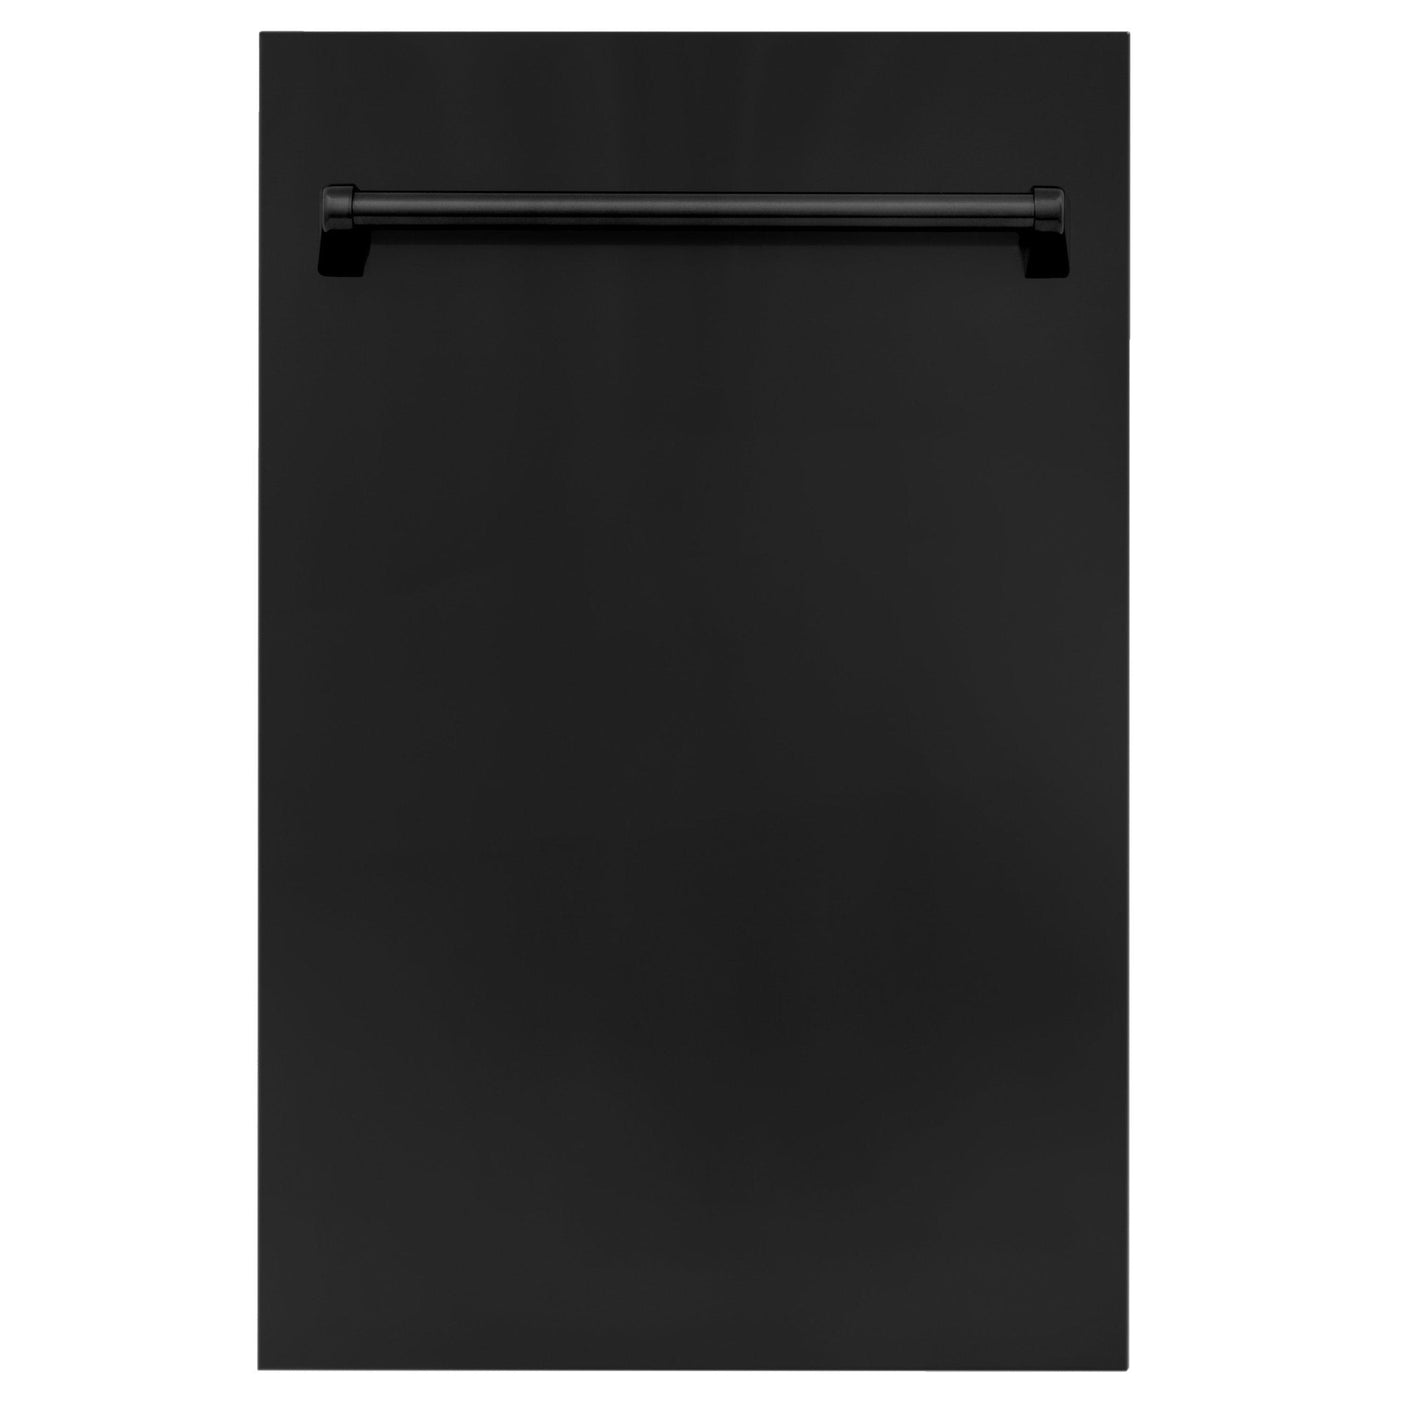 ZLINE 18 in. Dishwasher Panel with Traditional Handle (DP-18) [Color: Hand Hammered Copper]